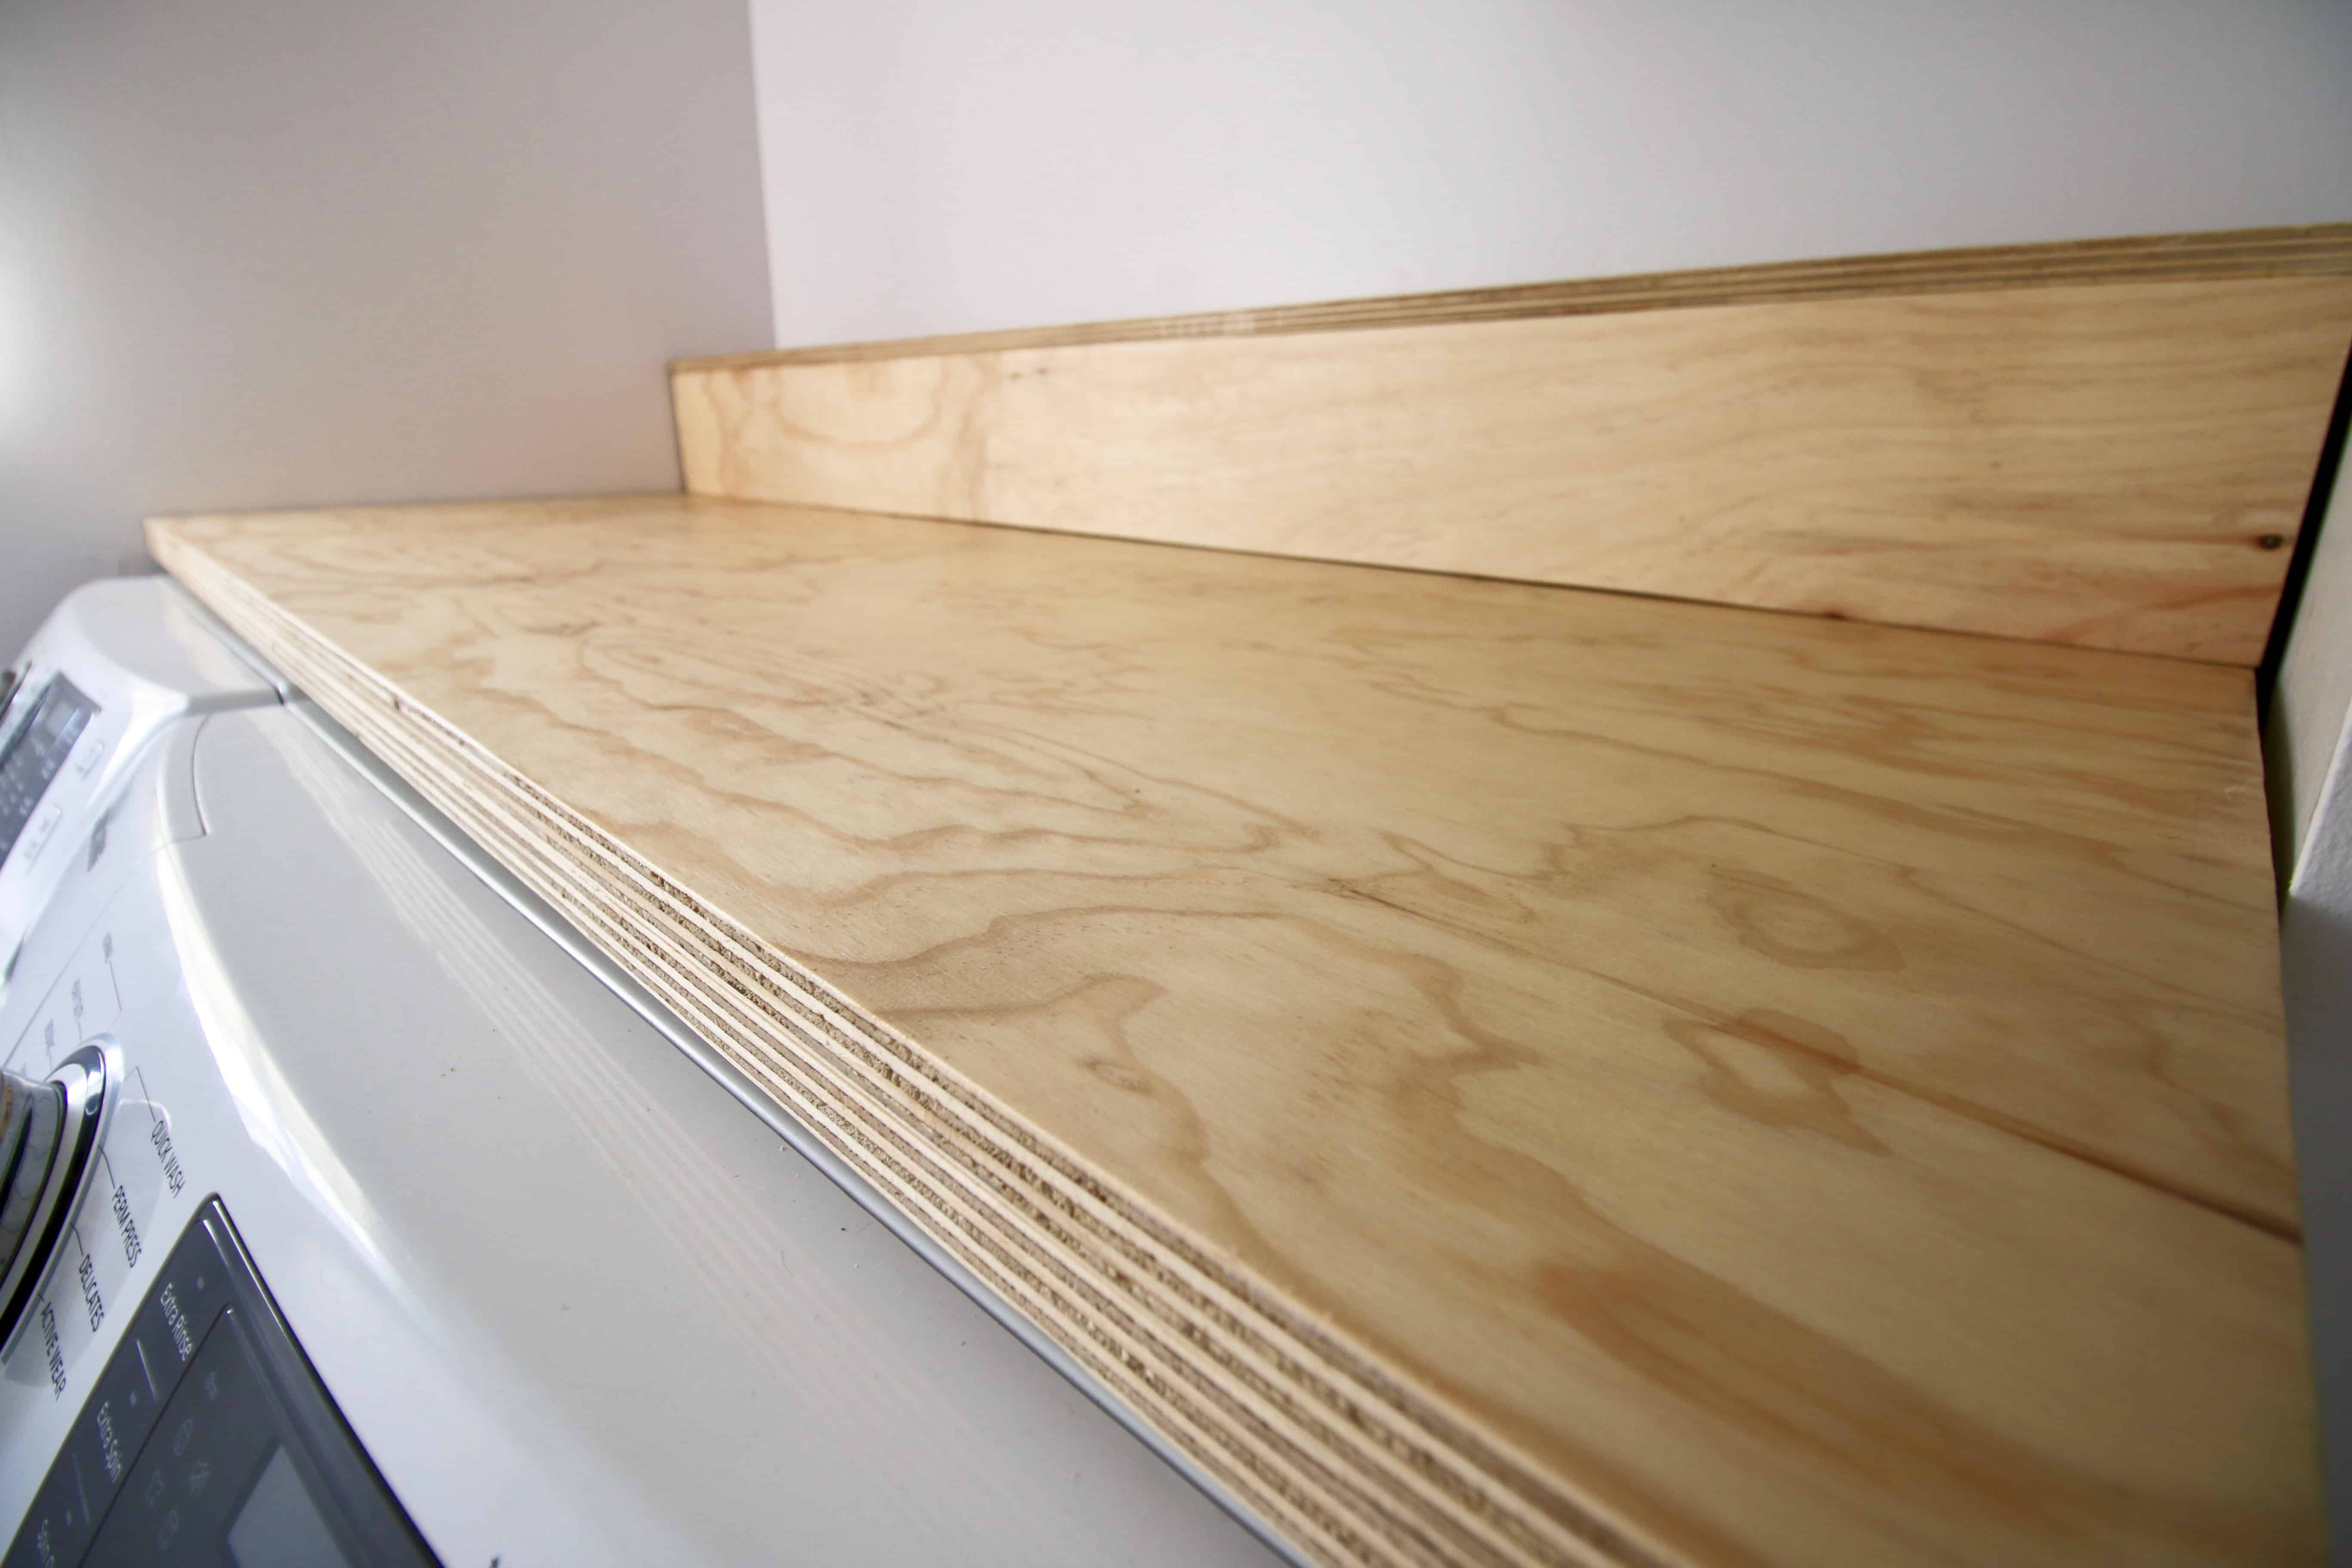 Can I Use Plywood For A Countertop, Baltic Birch Plywood Countertop